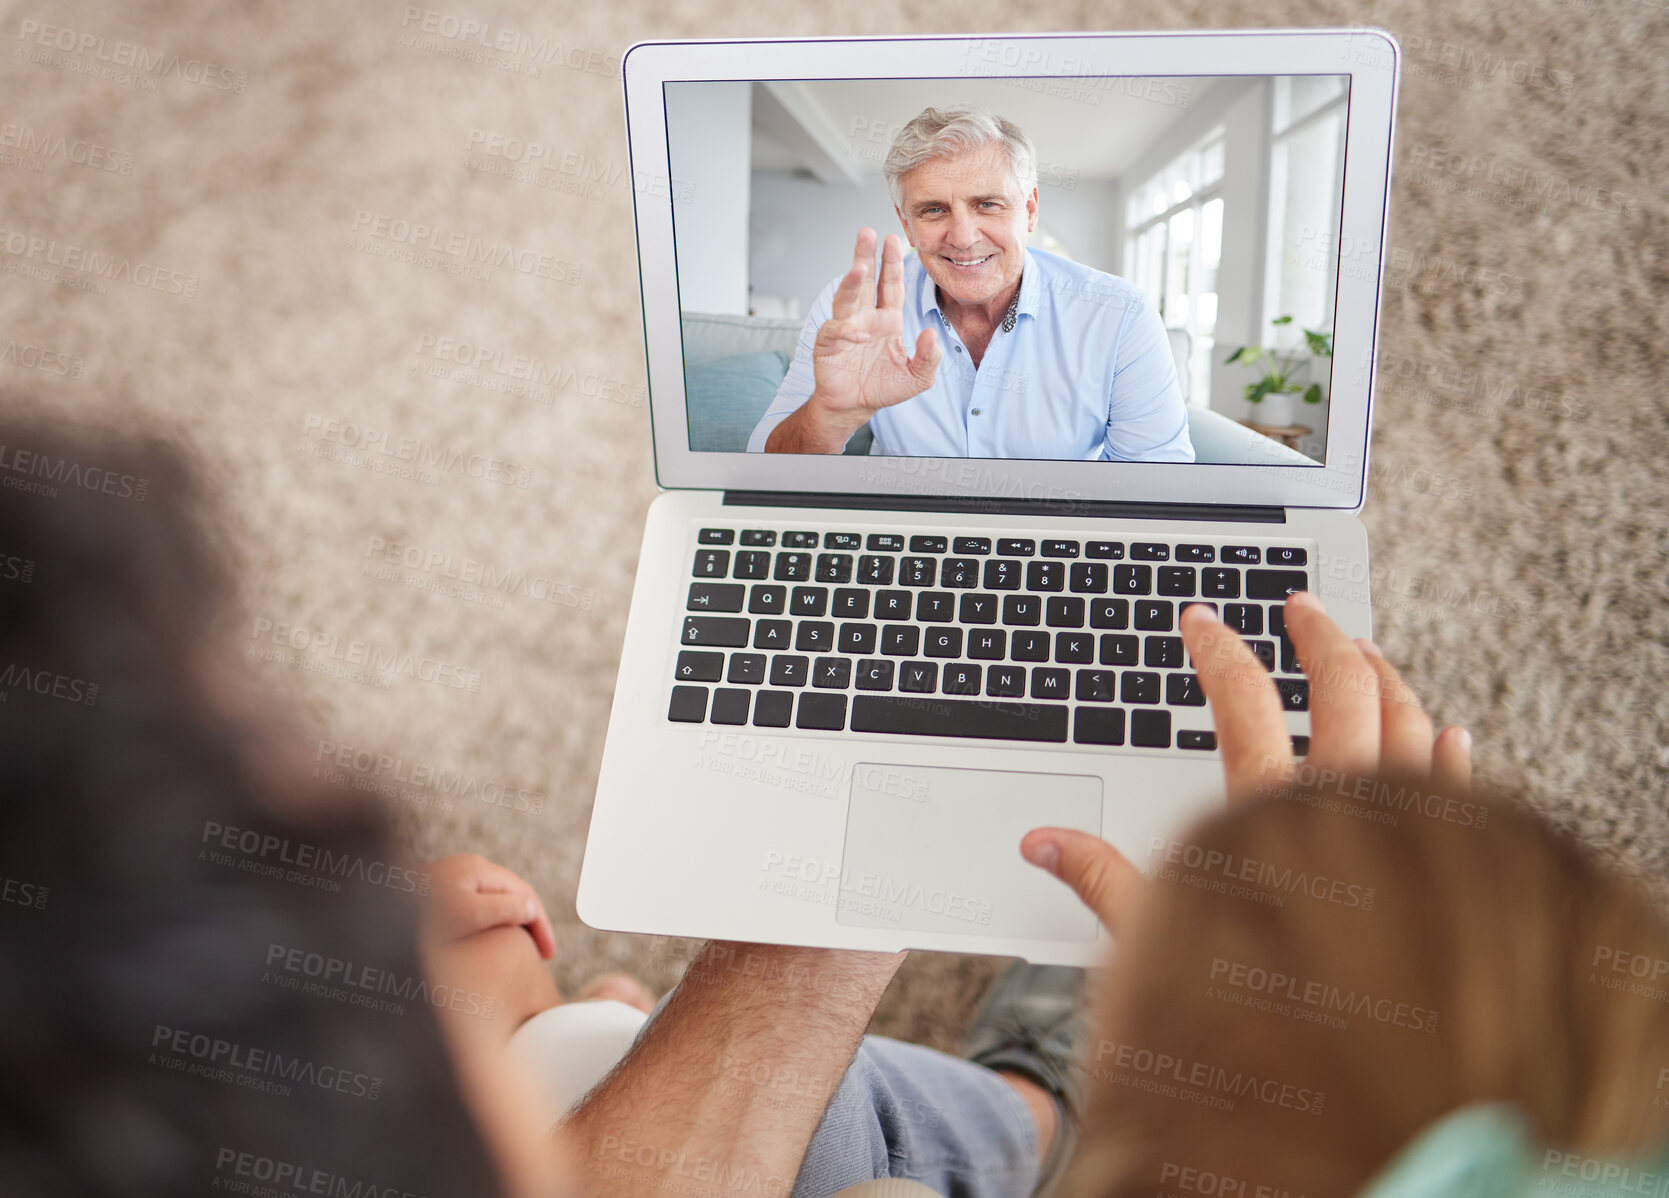 Buy stock photo Love, family and laptop video call with senior man waving hello on digital internet screen. Online app webcam communication with happy and smiling grandfather talking with adult children.

